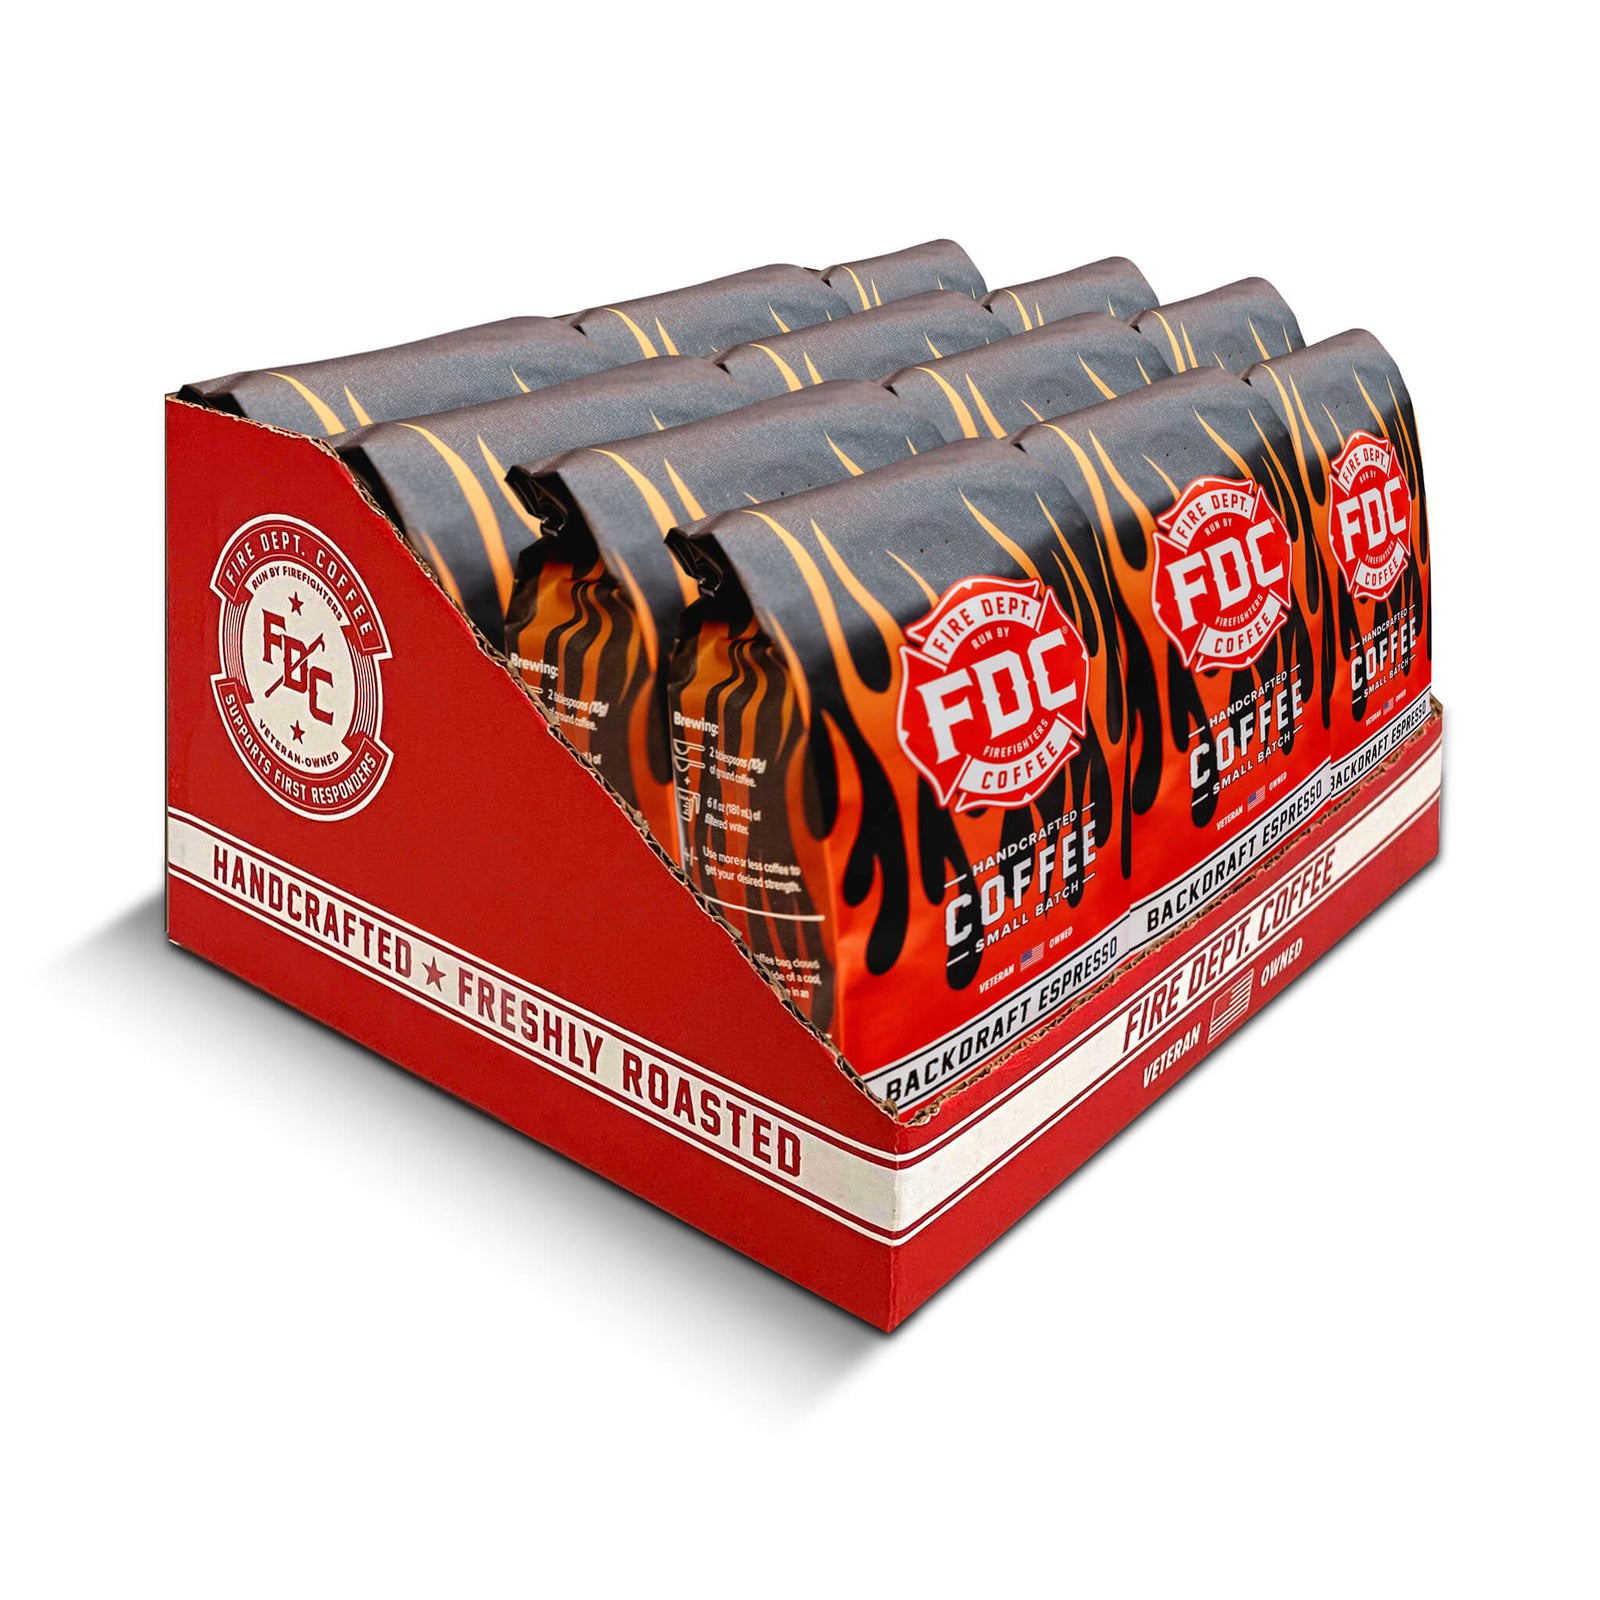 A five pound package of Fire Dept. Coffee's Backdraft Espresso Wholesale Coffee Roast.